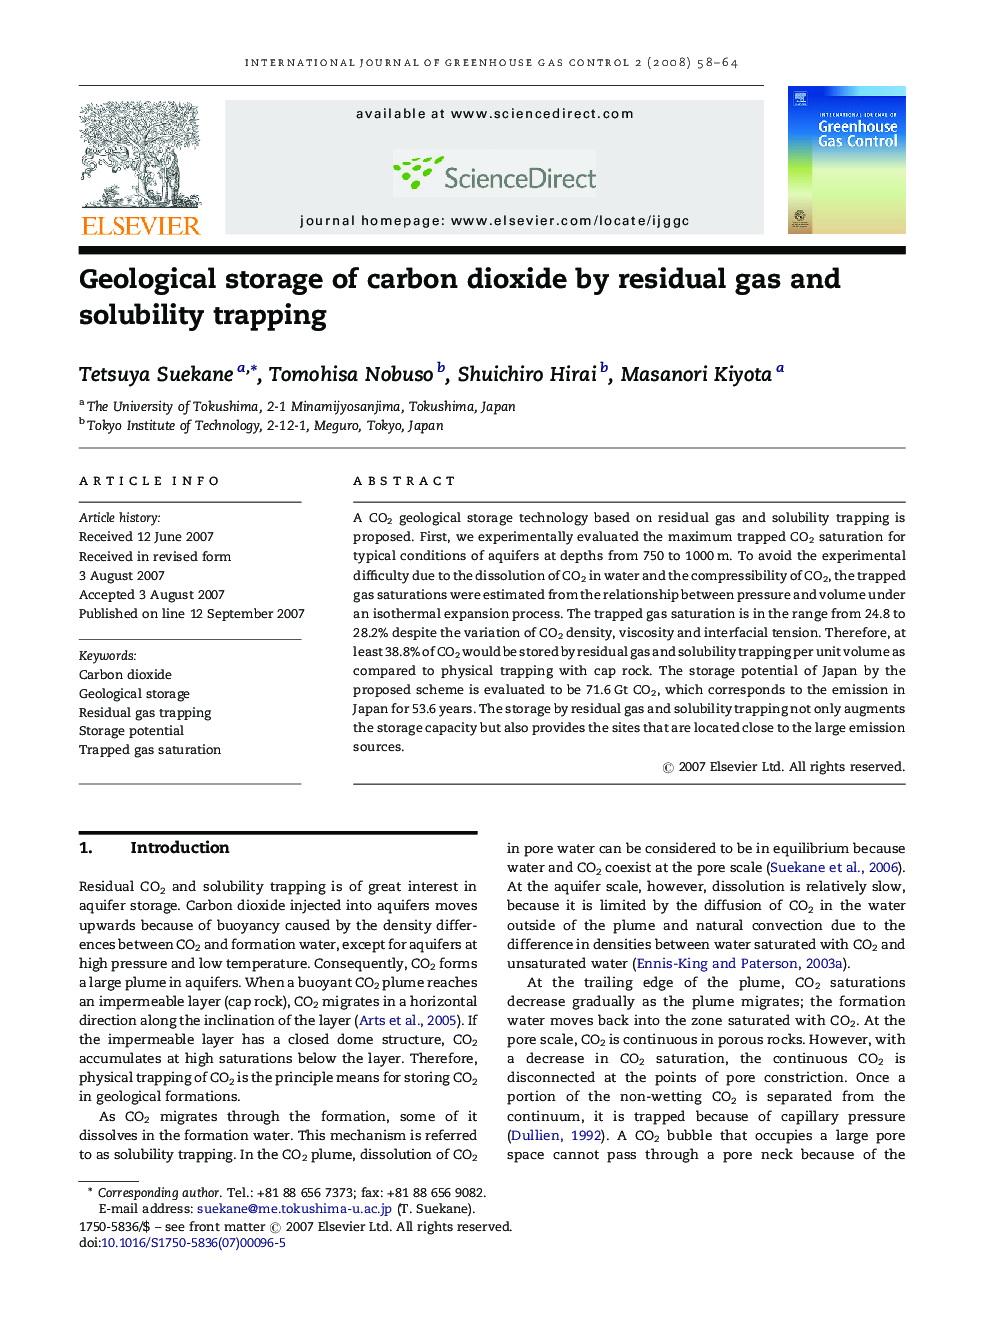 Geological storage of carbon dioxide by residual gas and solubility trapping